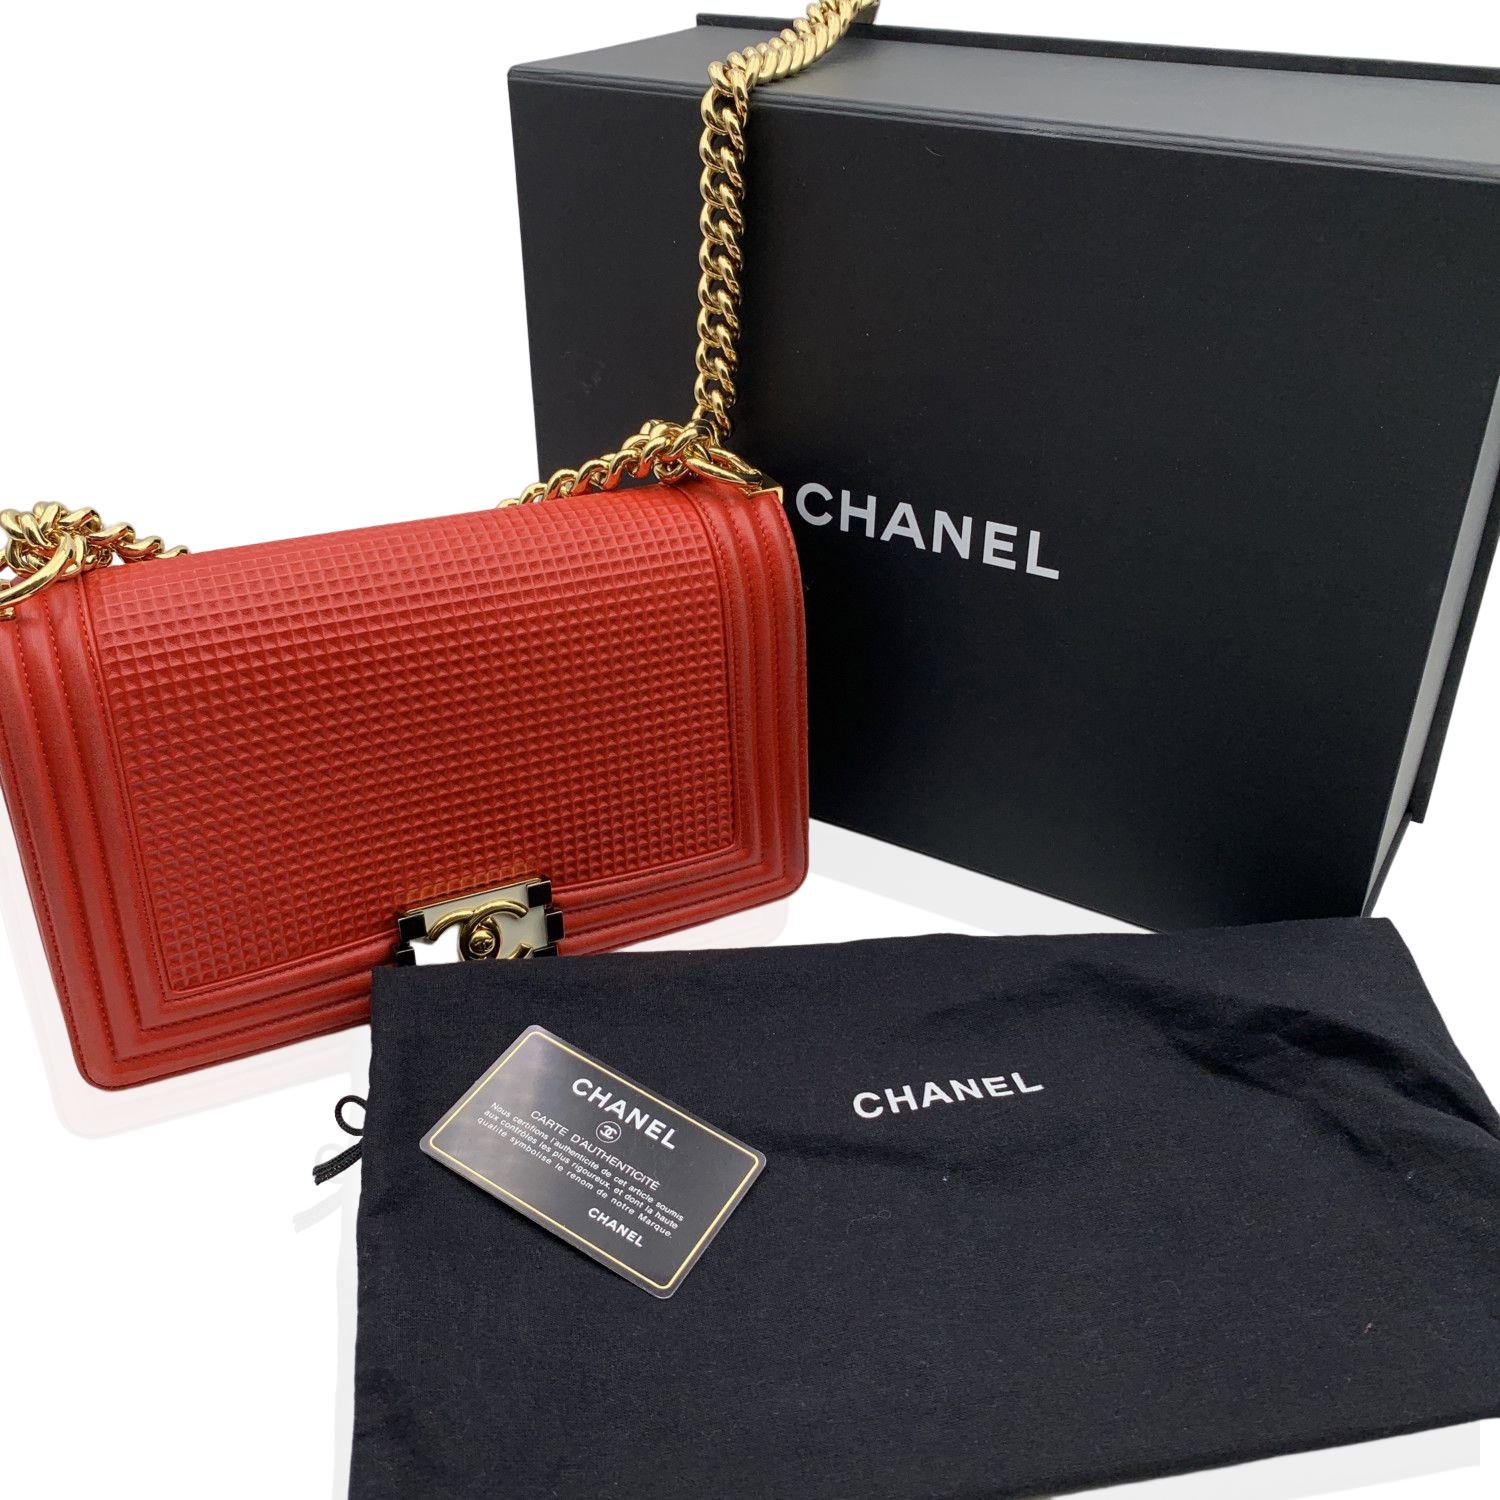 Chanel Red Cube Embossed Leather Medium Boy Shoulder Bag In Good Condition For Sale In Rome, Rome